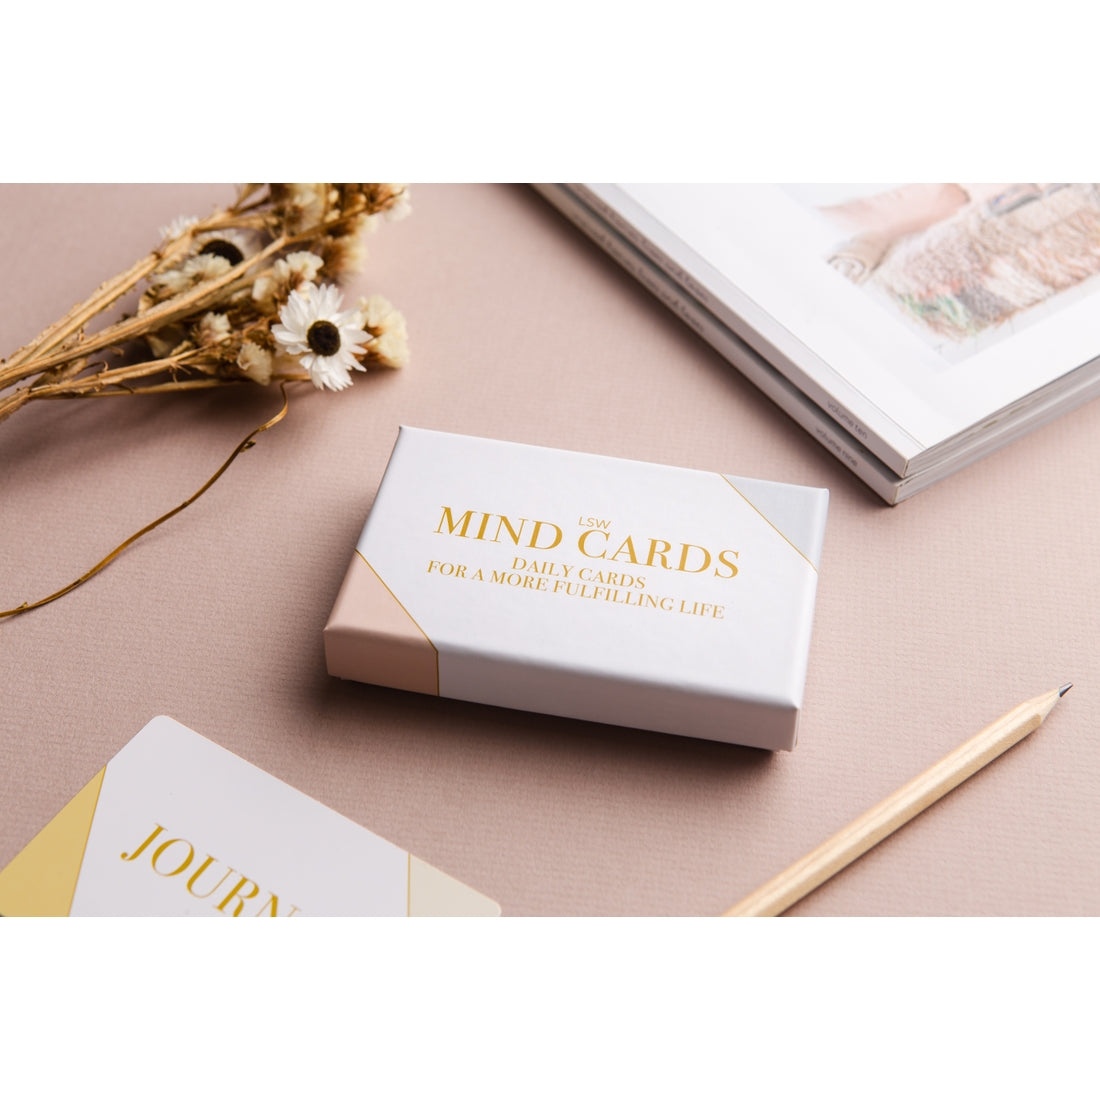 Stationery: Mind Cards by LSW - to promote happiness and wellbeing